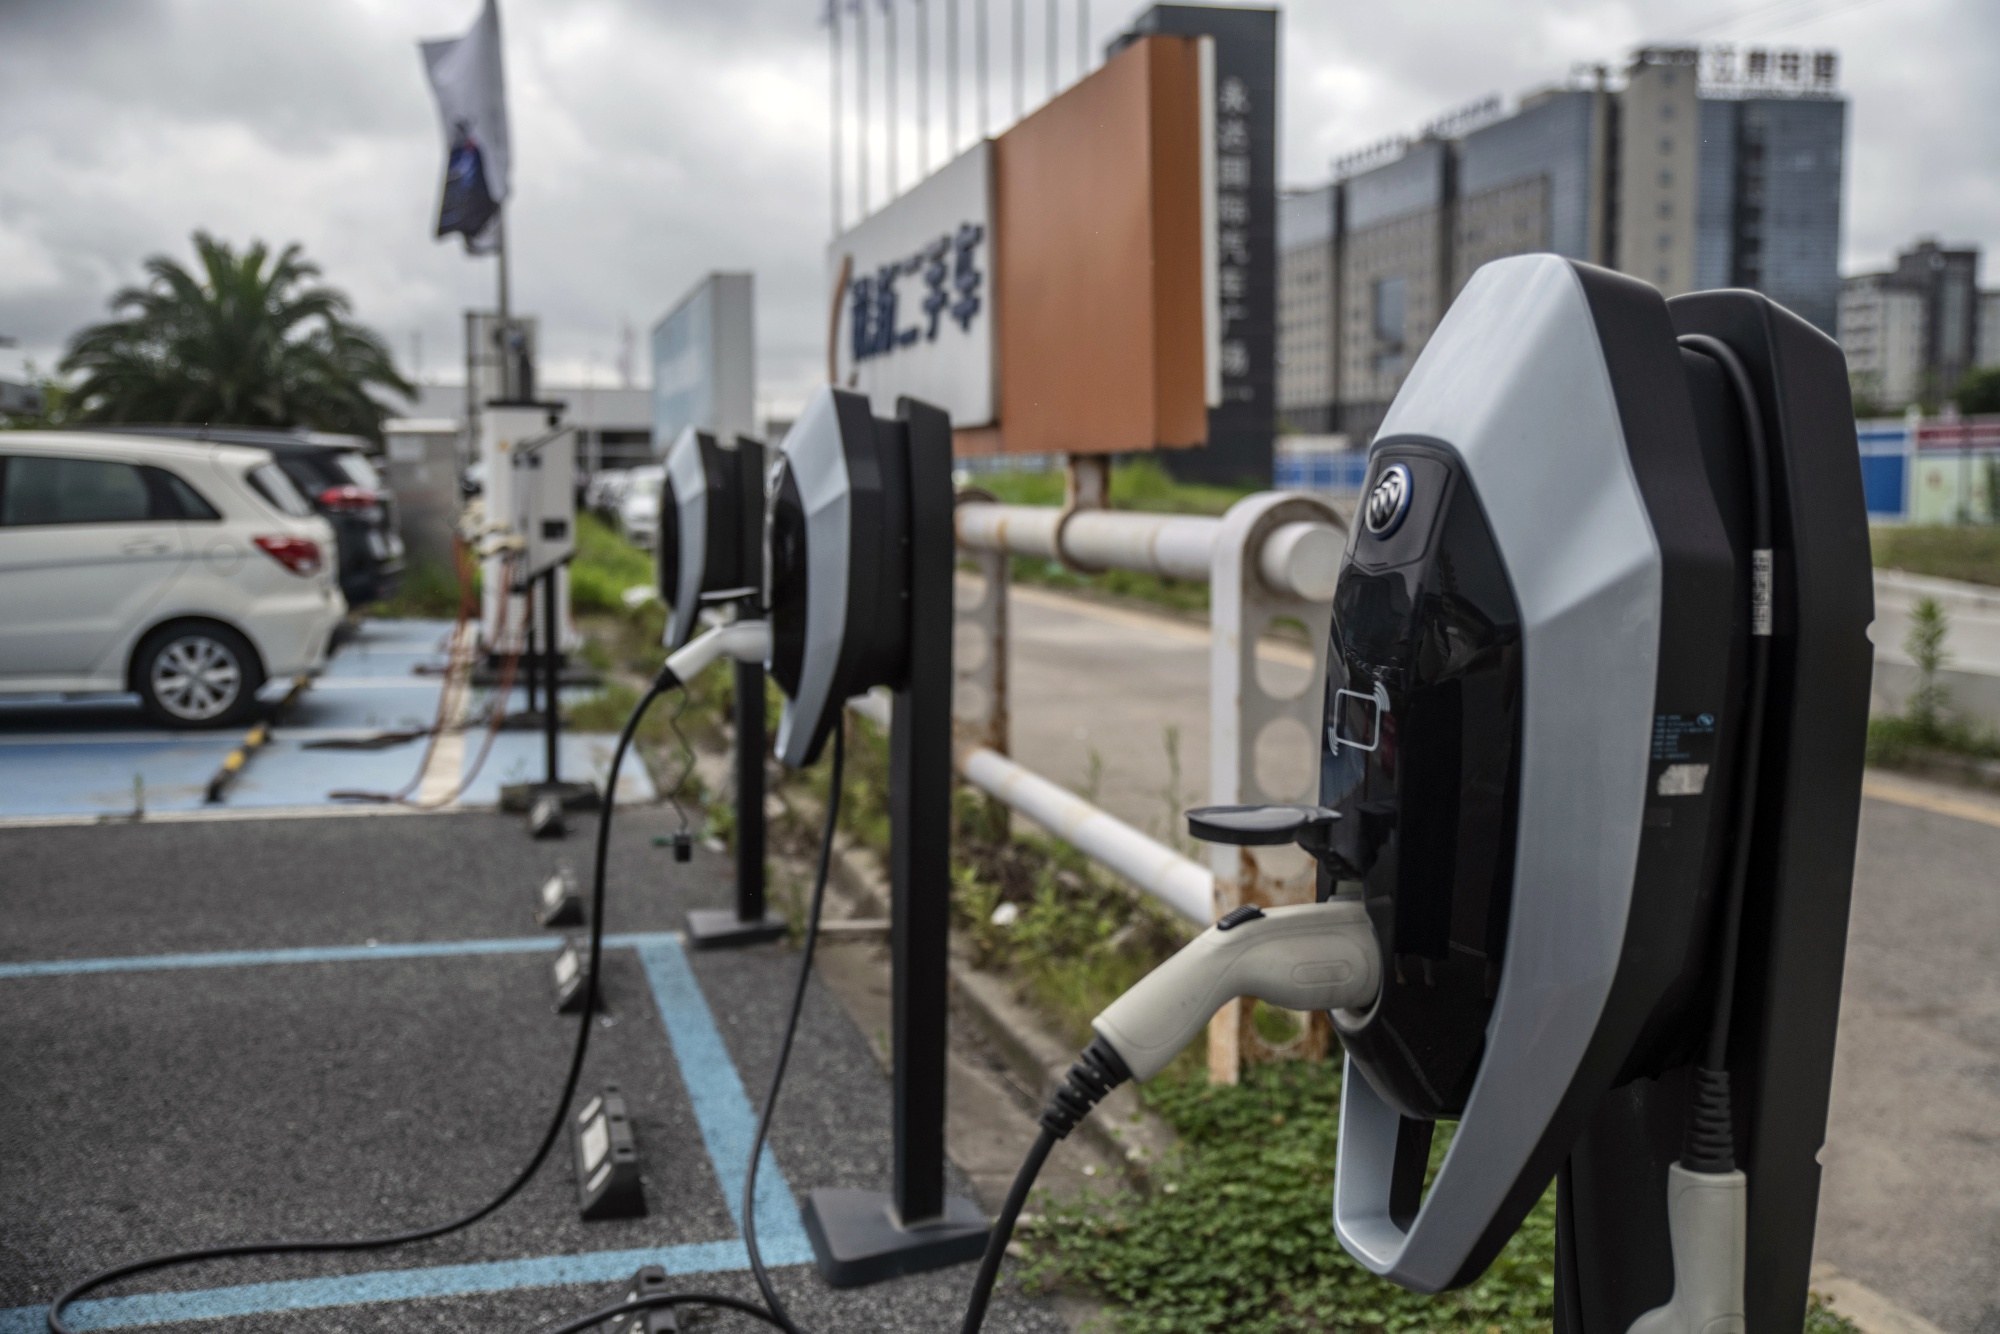 These Electric Vehicle Chargers Will Come to You - Bloomberg